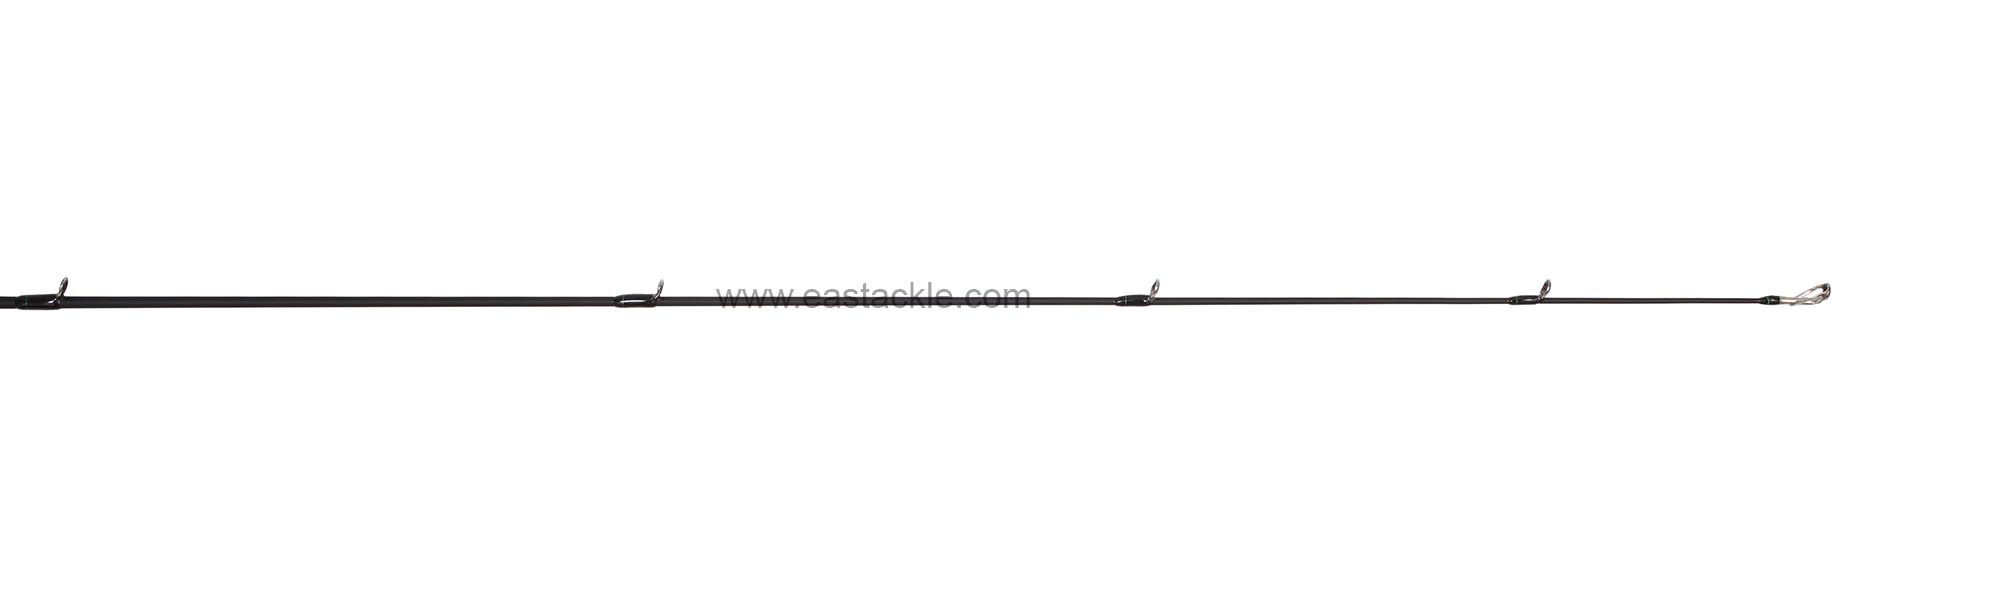 Rapala - Koivu - KVC652ML - Bait Casting Rod - Tip Section (Side View) | Eastackle